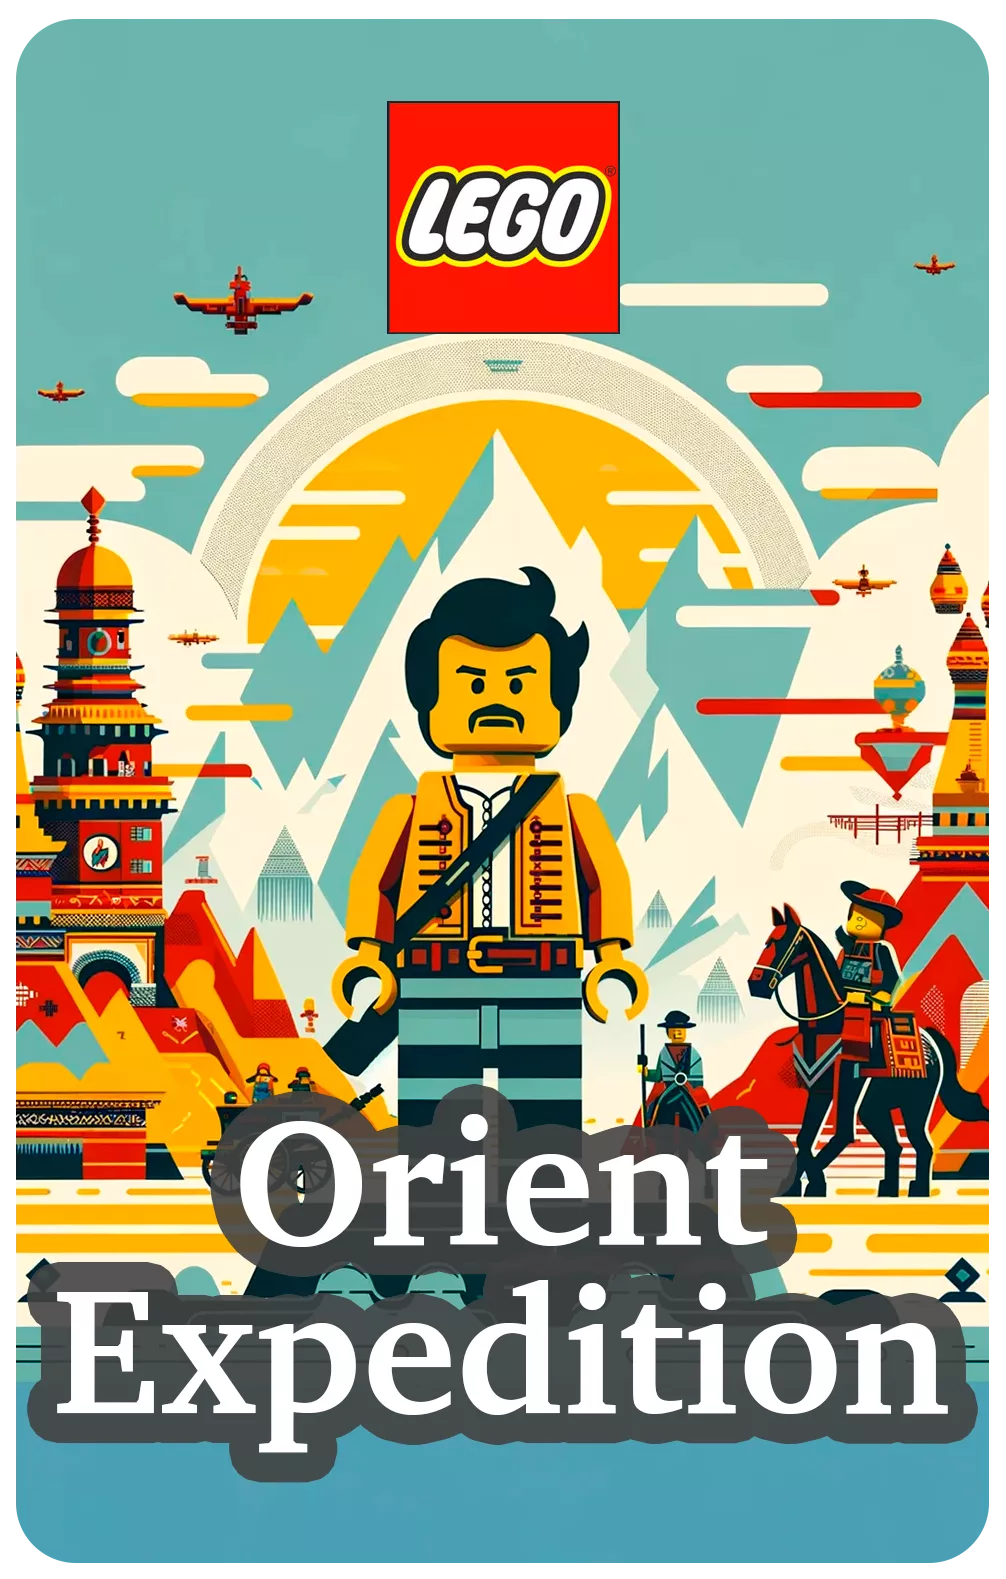 LEGO Orient Expedition